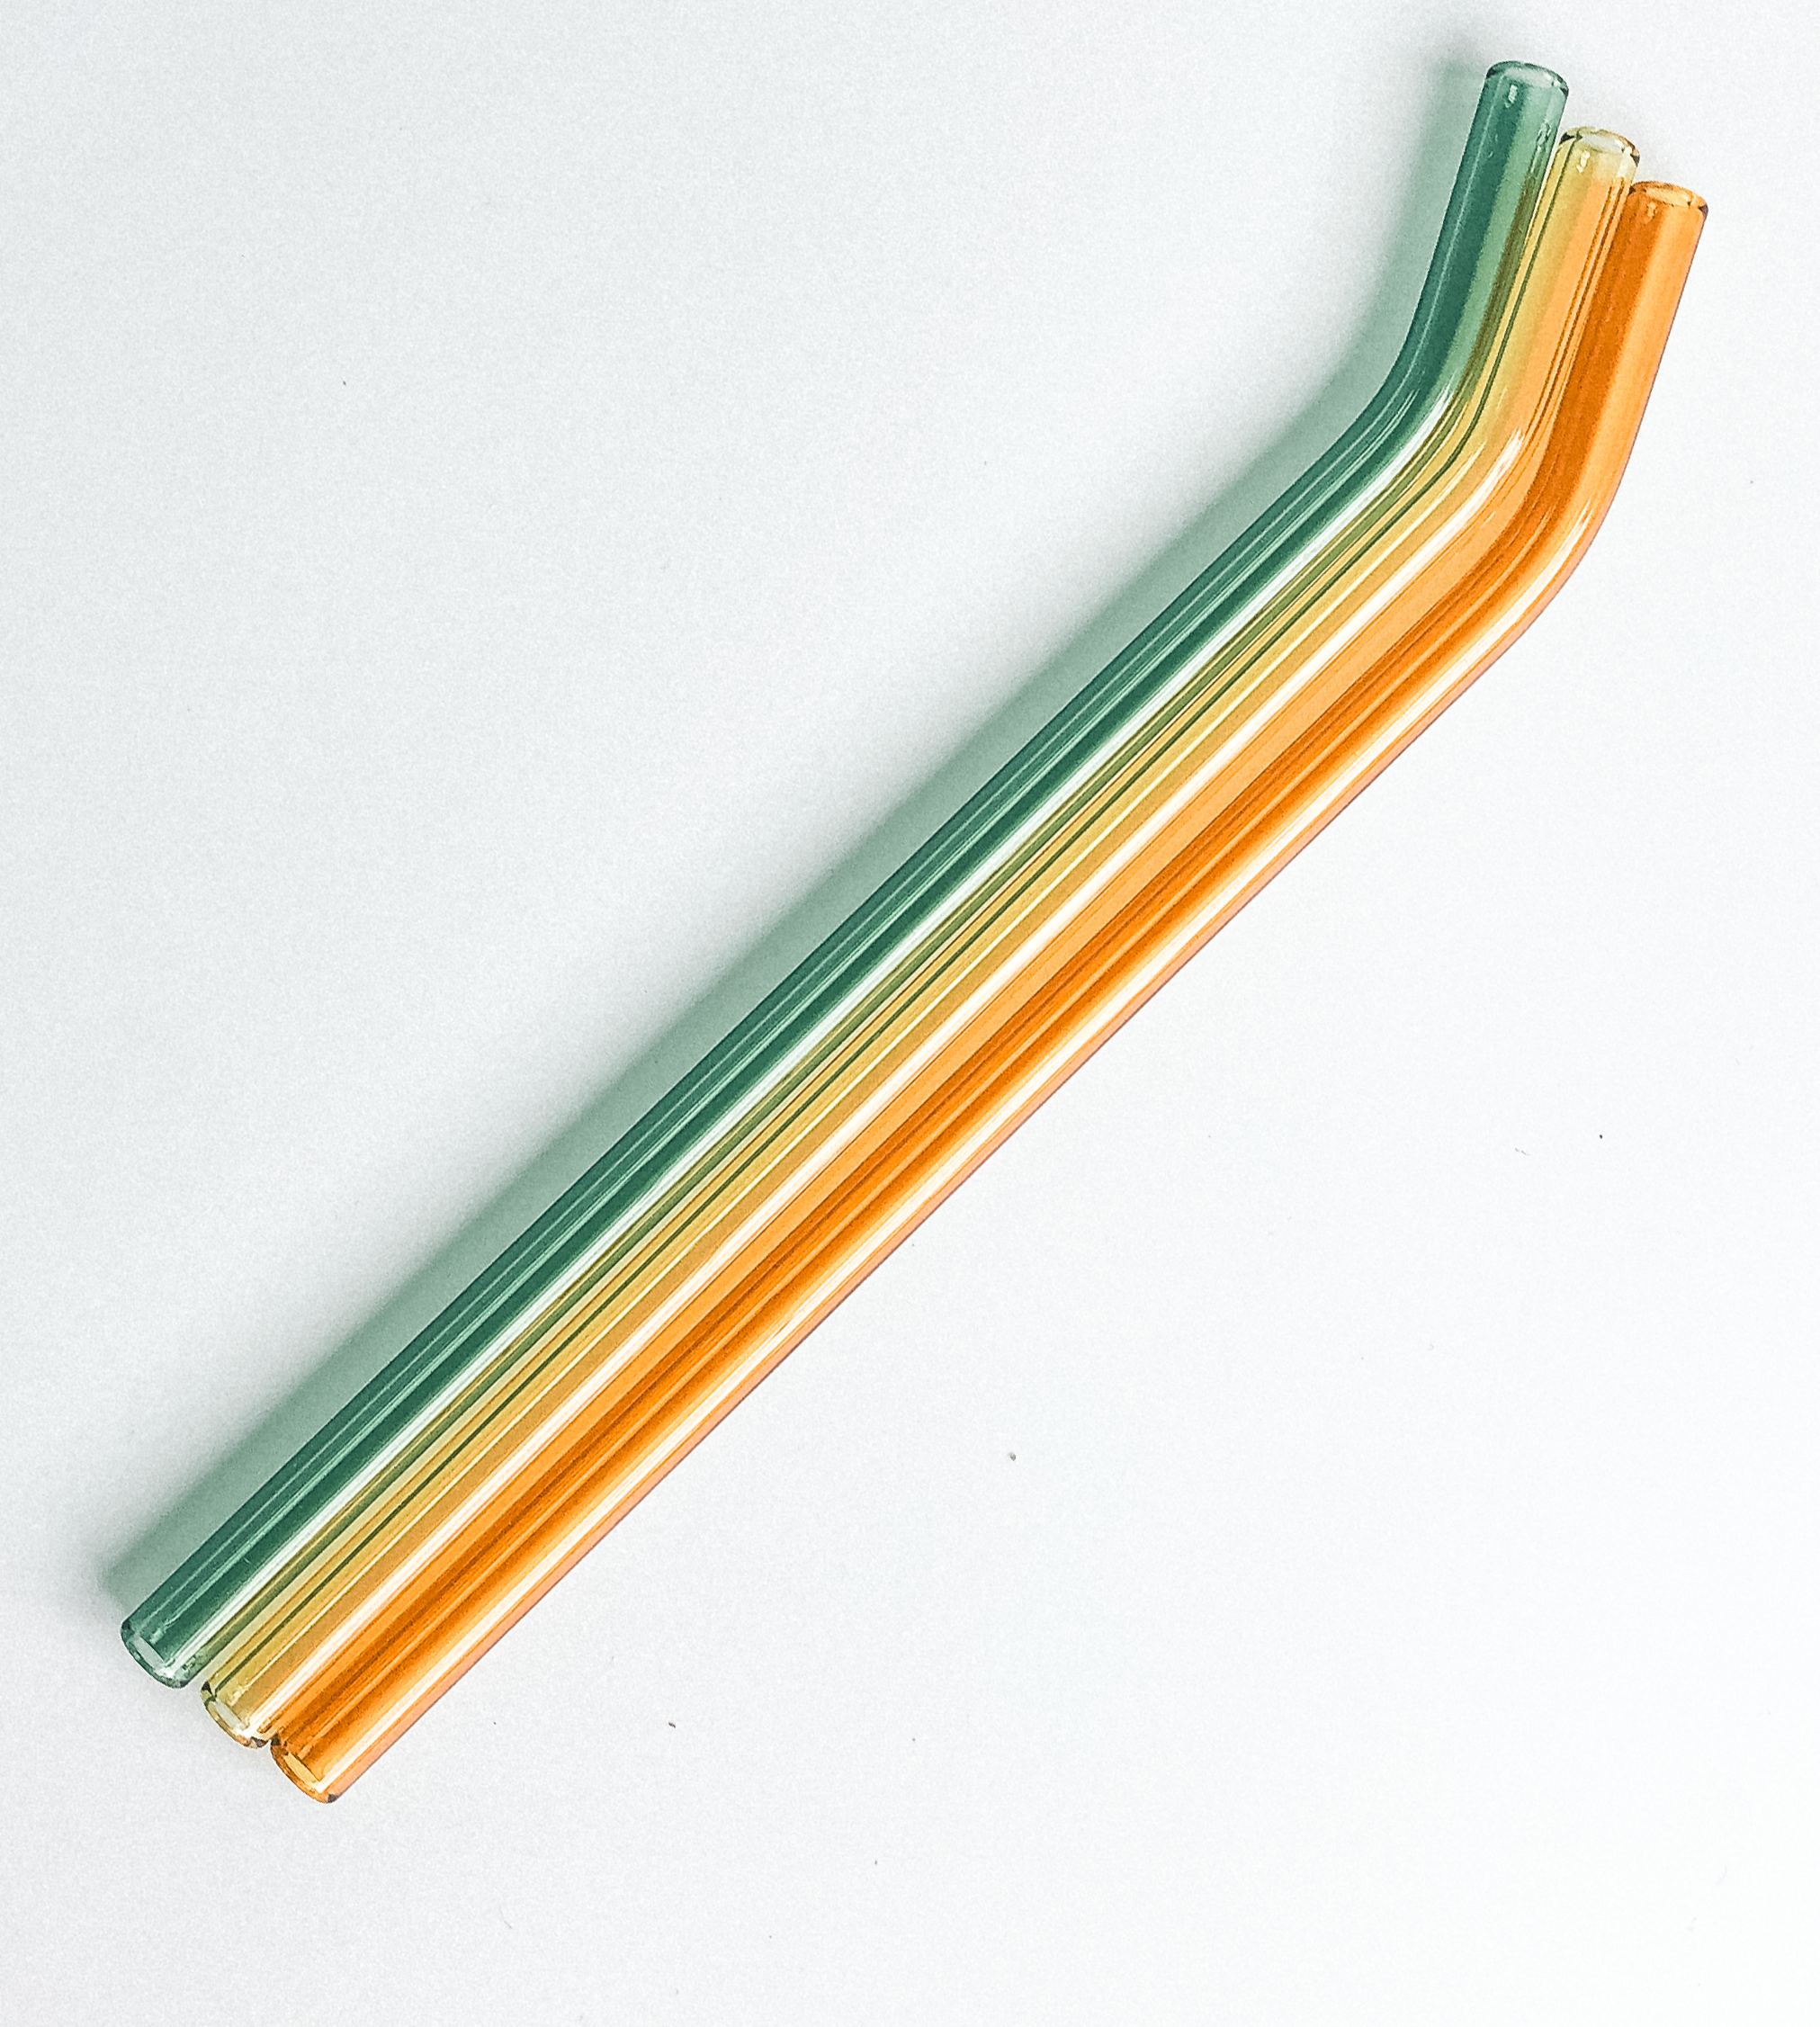 Reusable Glass Straws by PROSE Tabletop